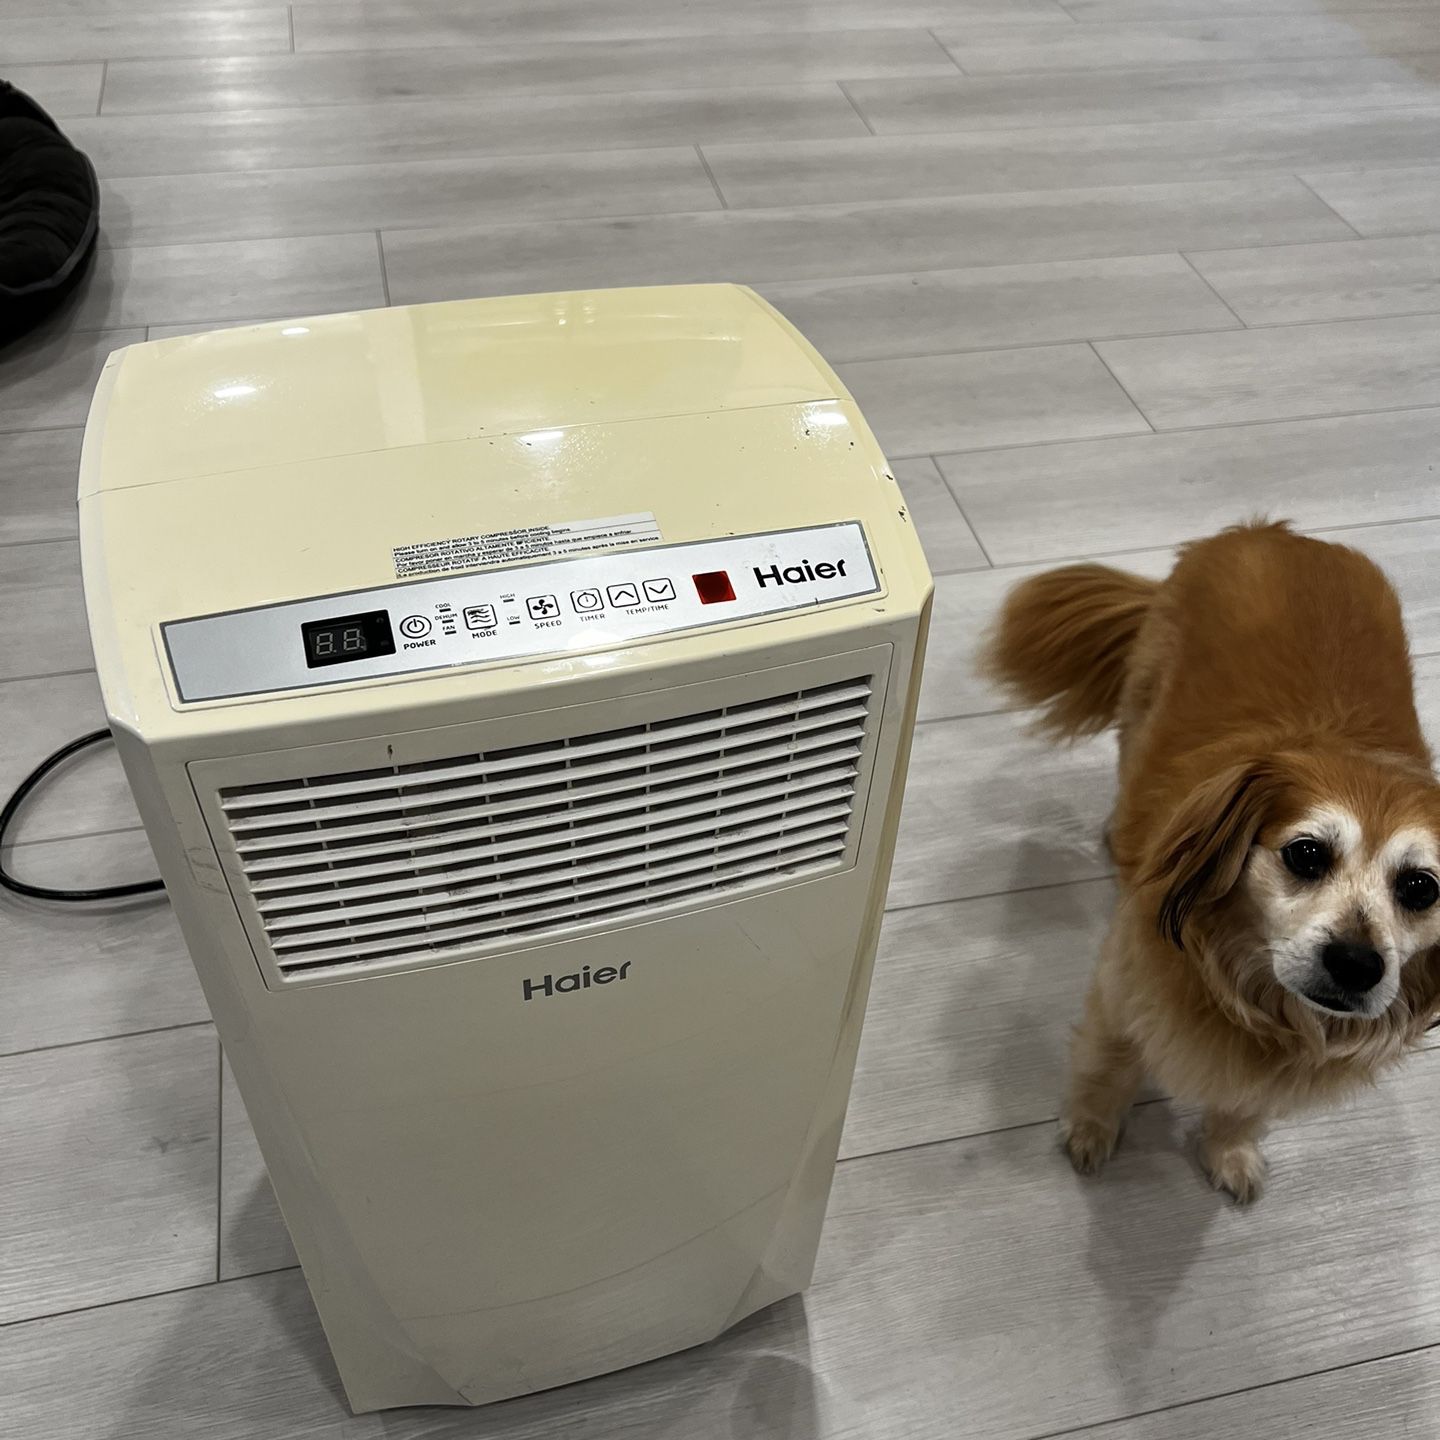 Portable Air Conditioner on Wheels - Beat the Summer Heat for $90